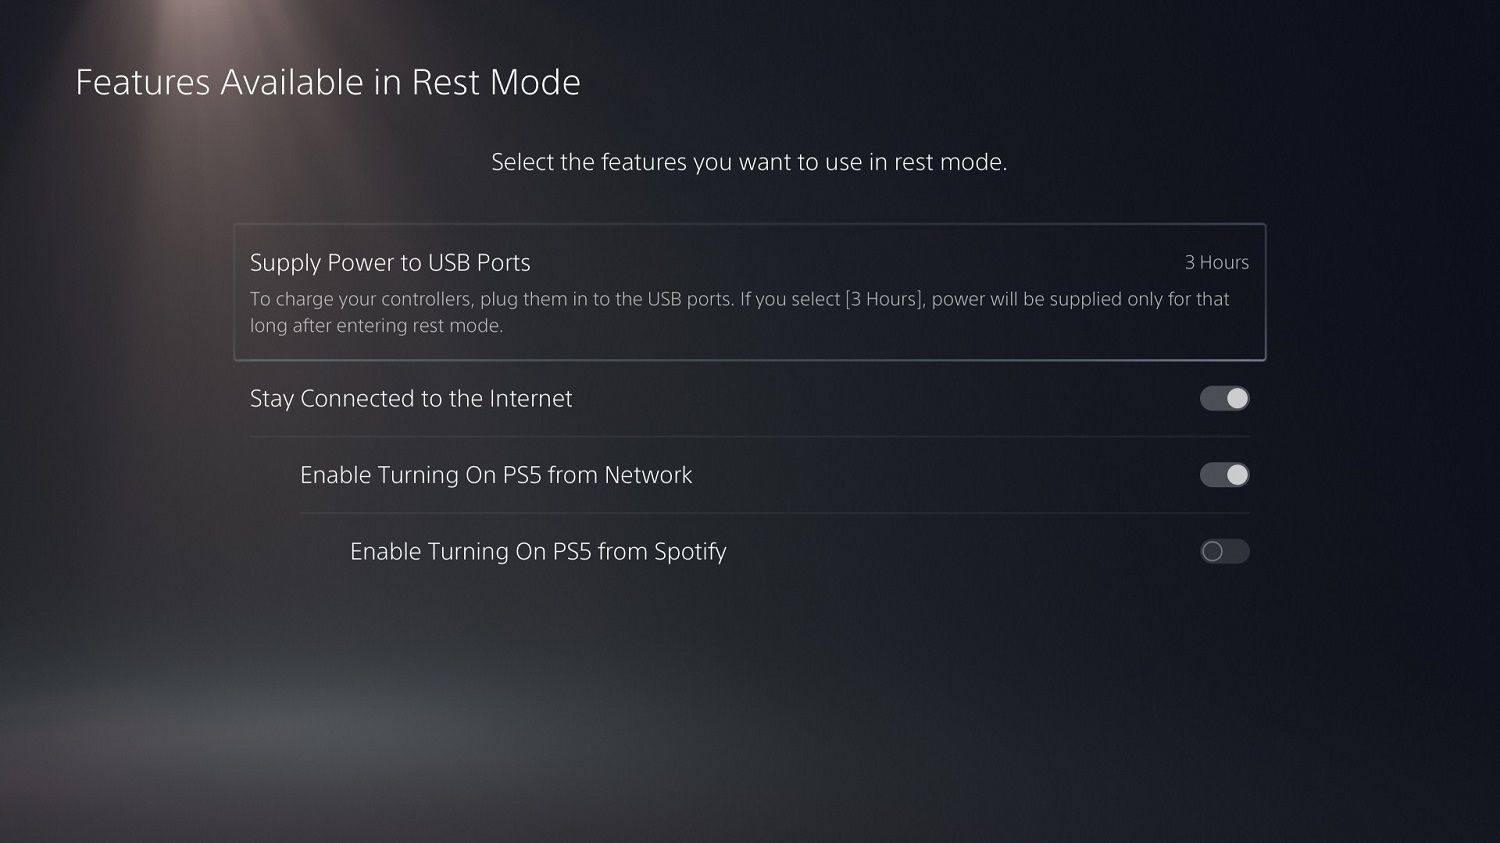 Rest mode features on PS5.